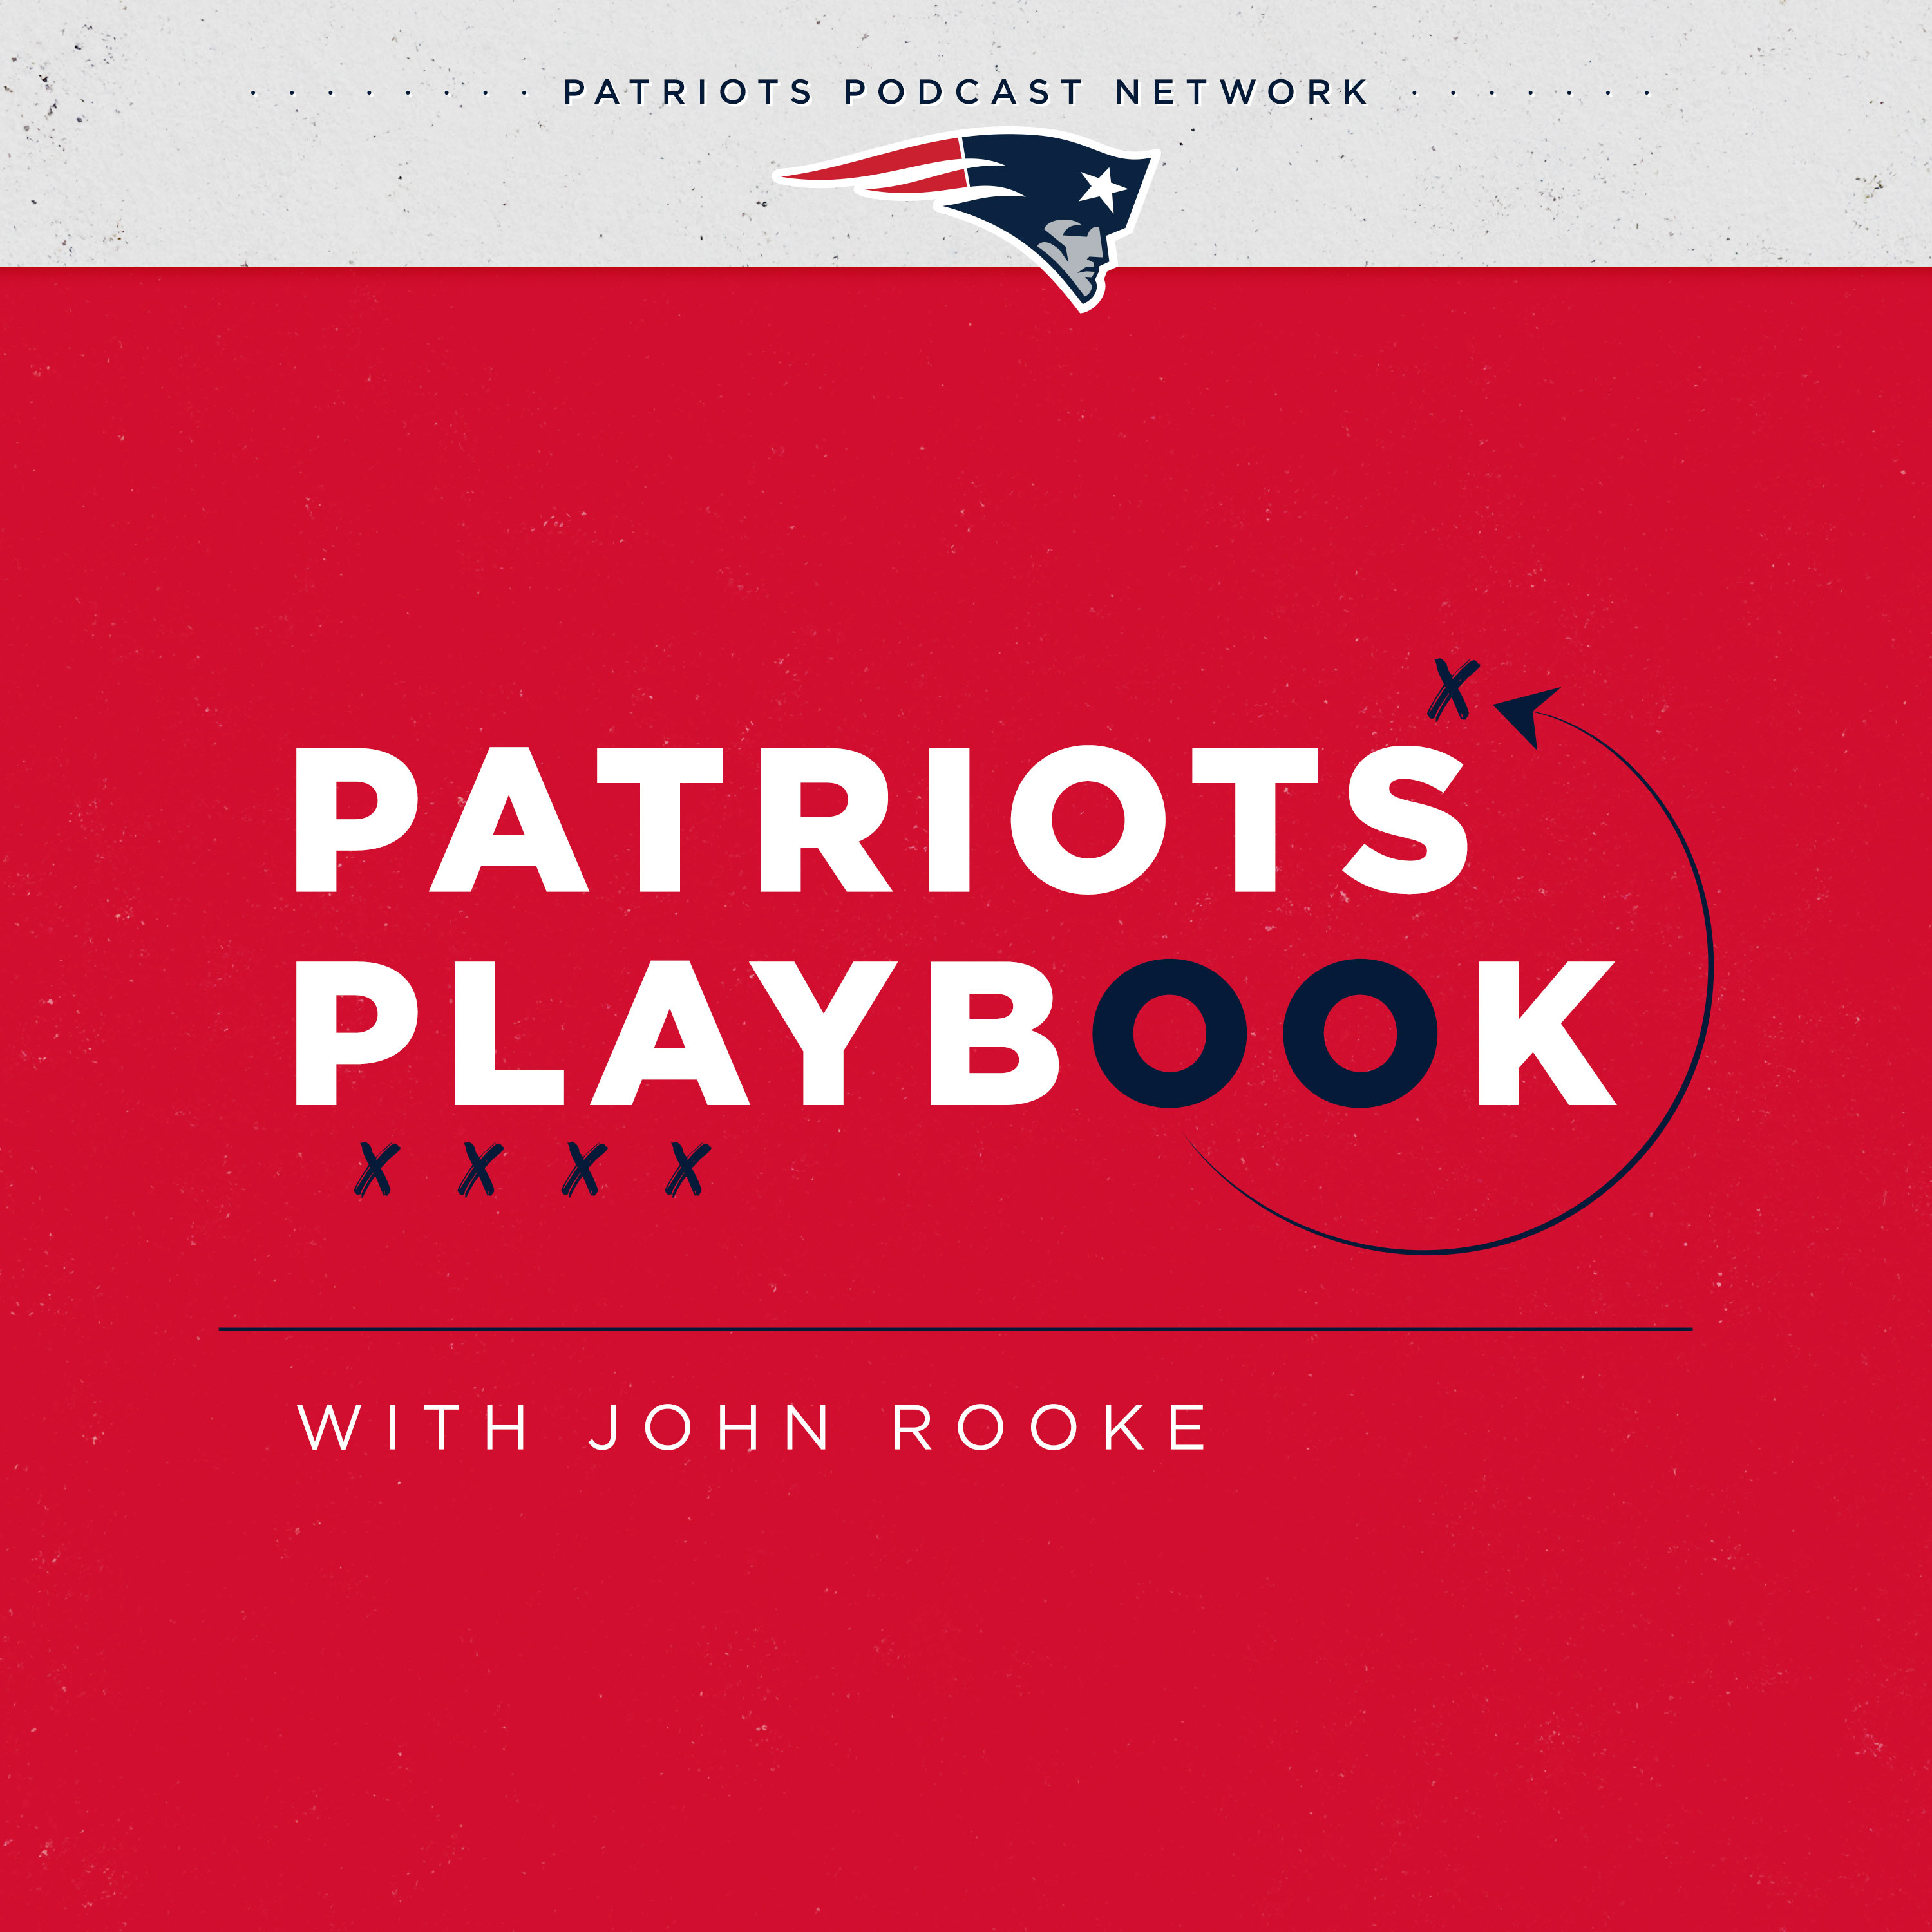 Patriots Playbook 6/22: Jersey Reveal Reaction, Fan Roundtable on 2022 Outlook